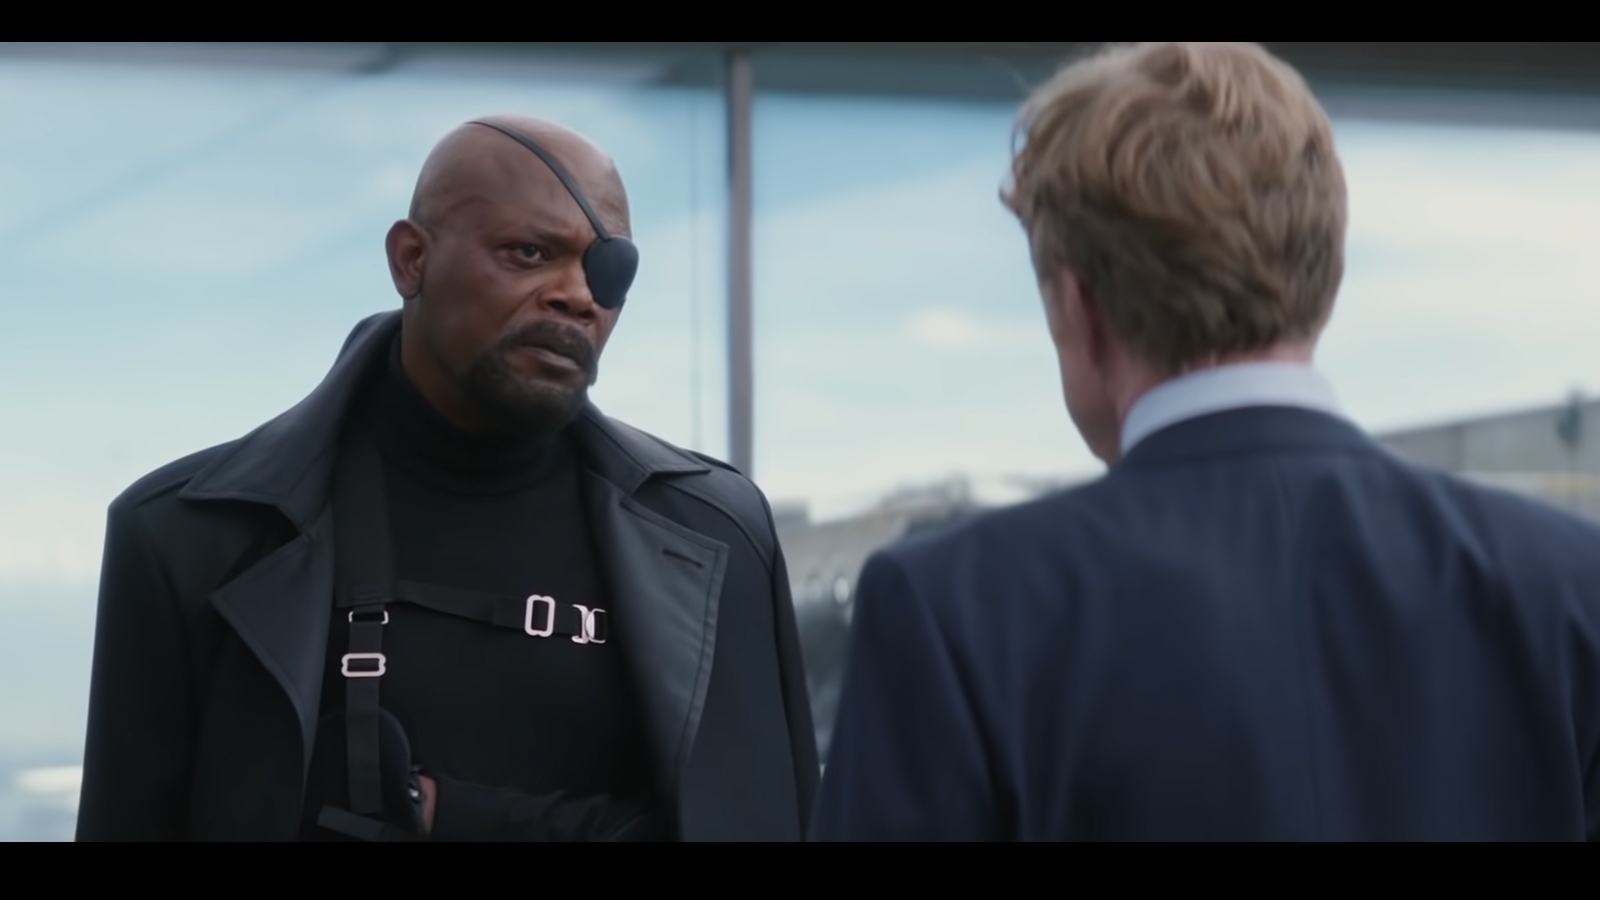 Nick Fury is set to appear in a flurry of MCU assets in the next few years.